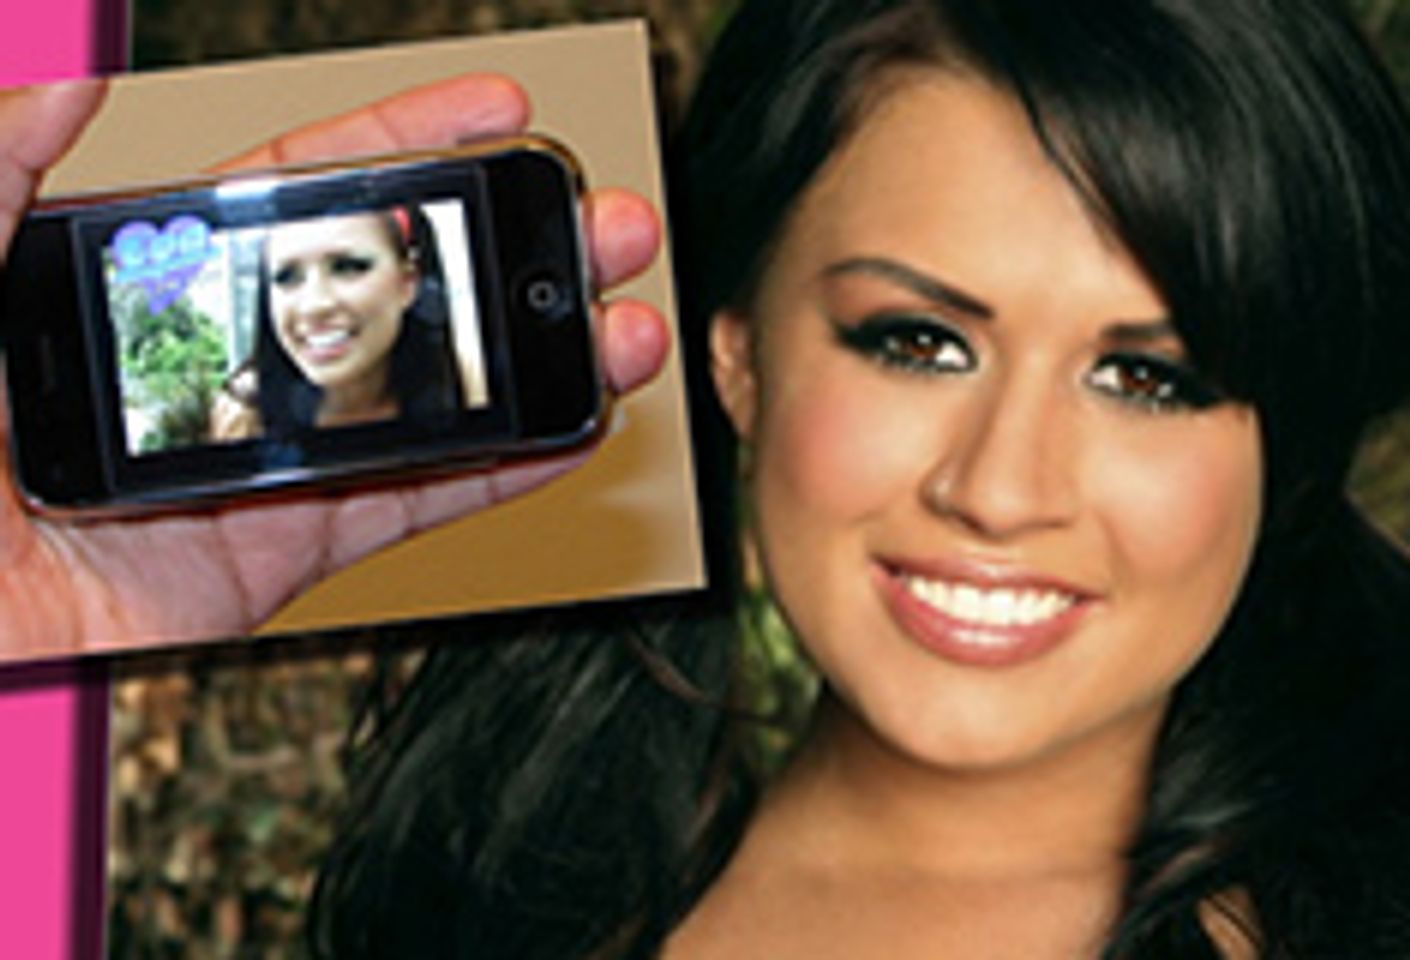 'Fun with Eva Angelina' Series Available for iPhone, iPod